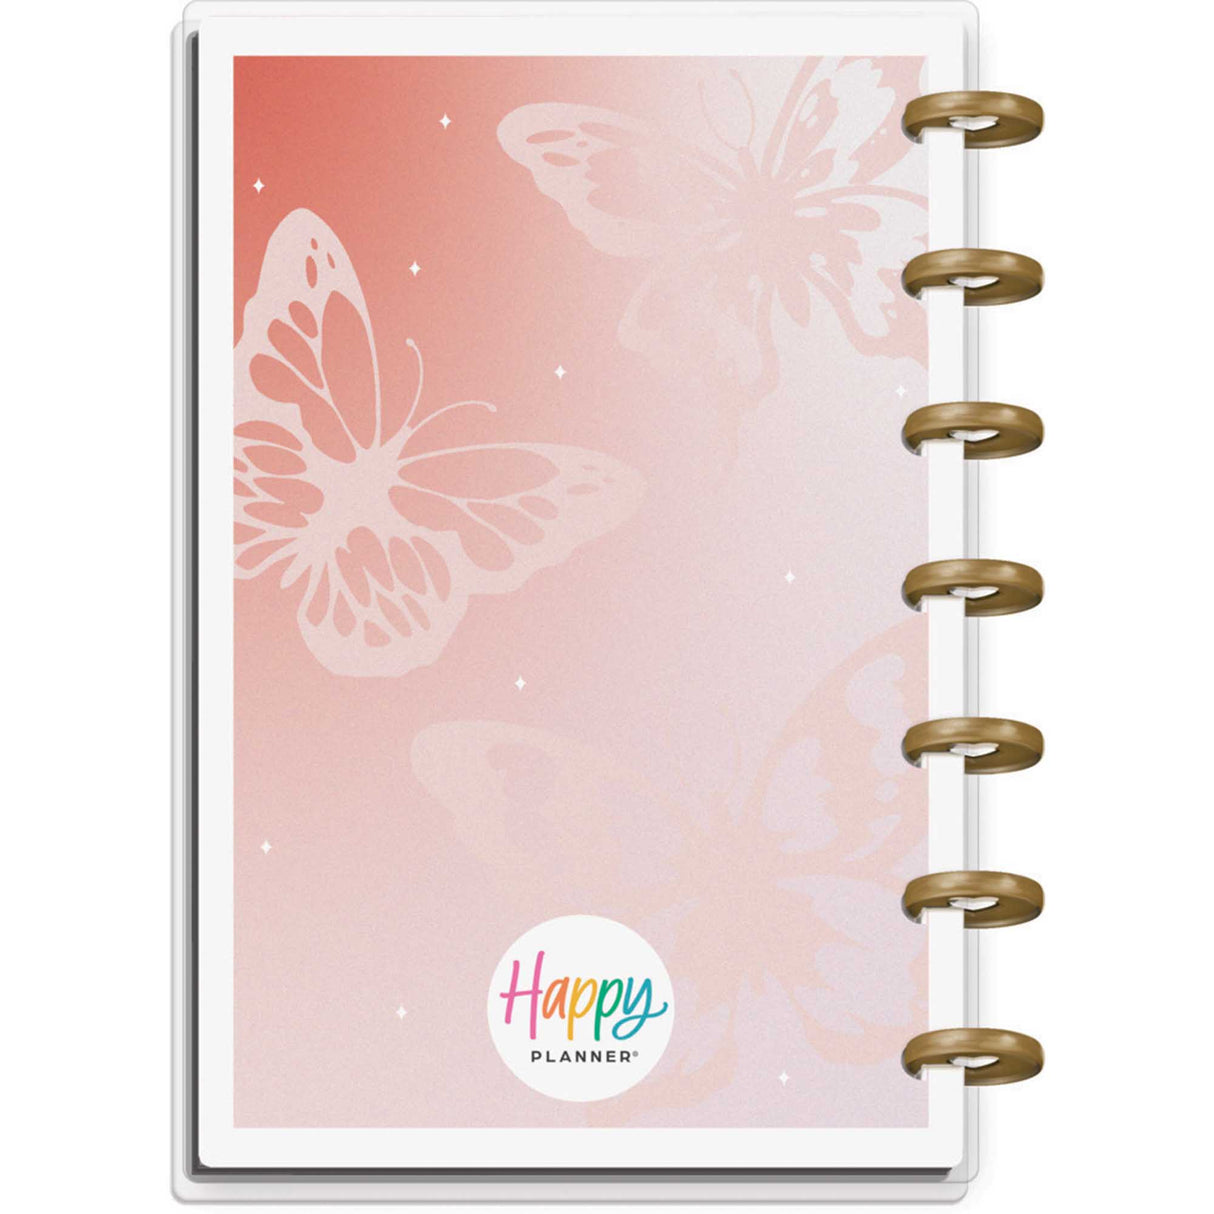 Happy Planner Butterfly Effect Mini Notebook - Lined